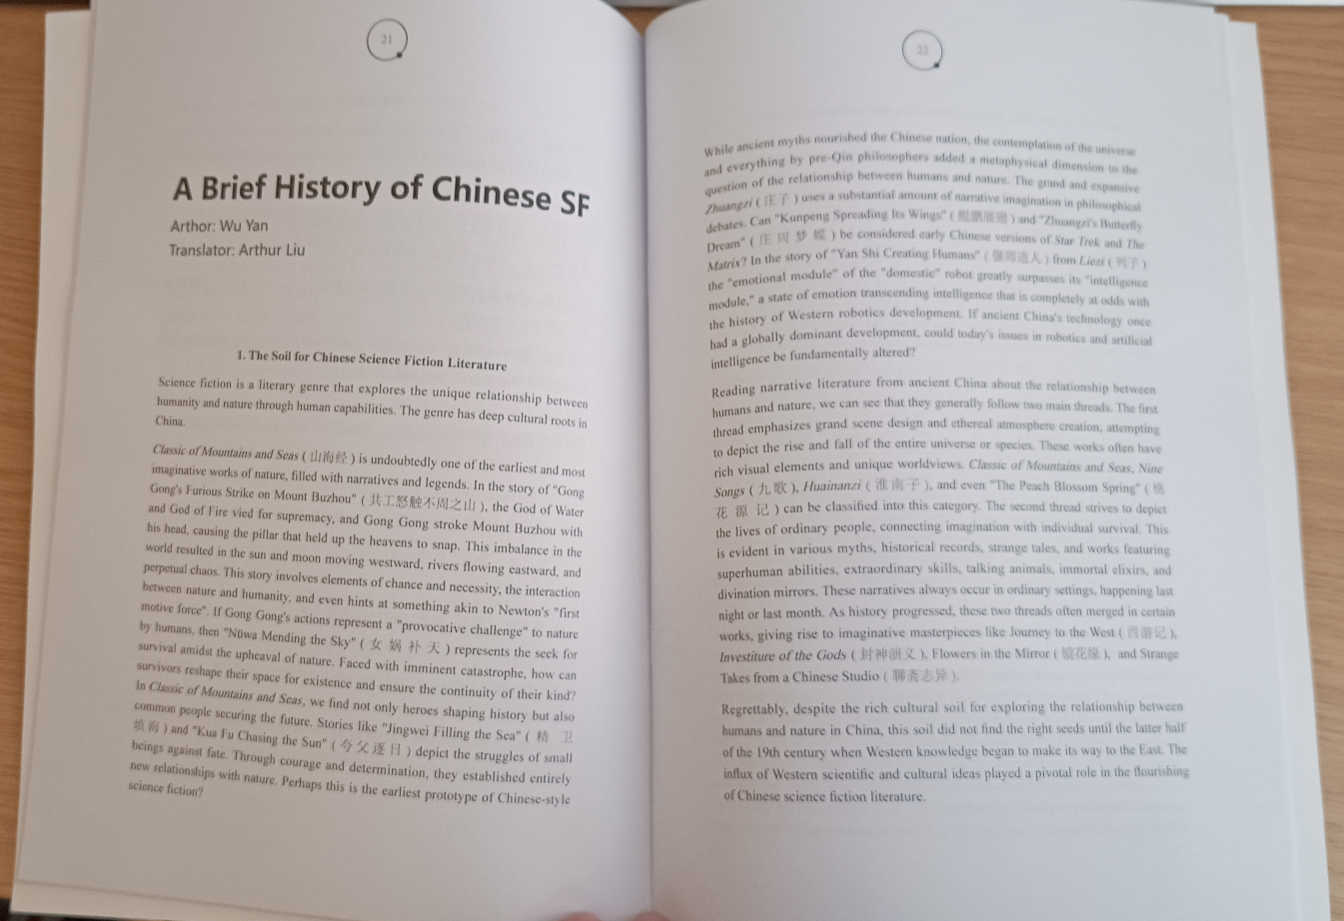 The opening spread of the translation of A Brief History of Chinese SF